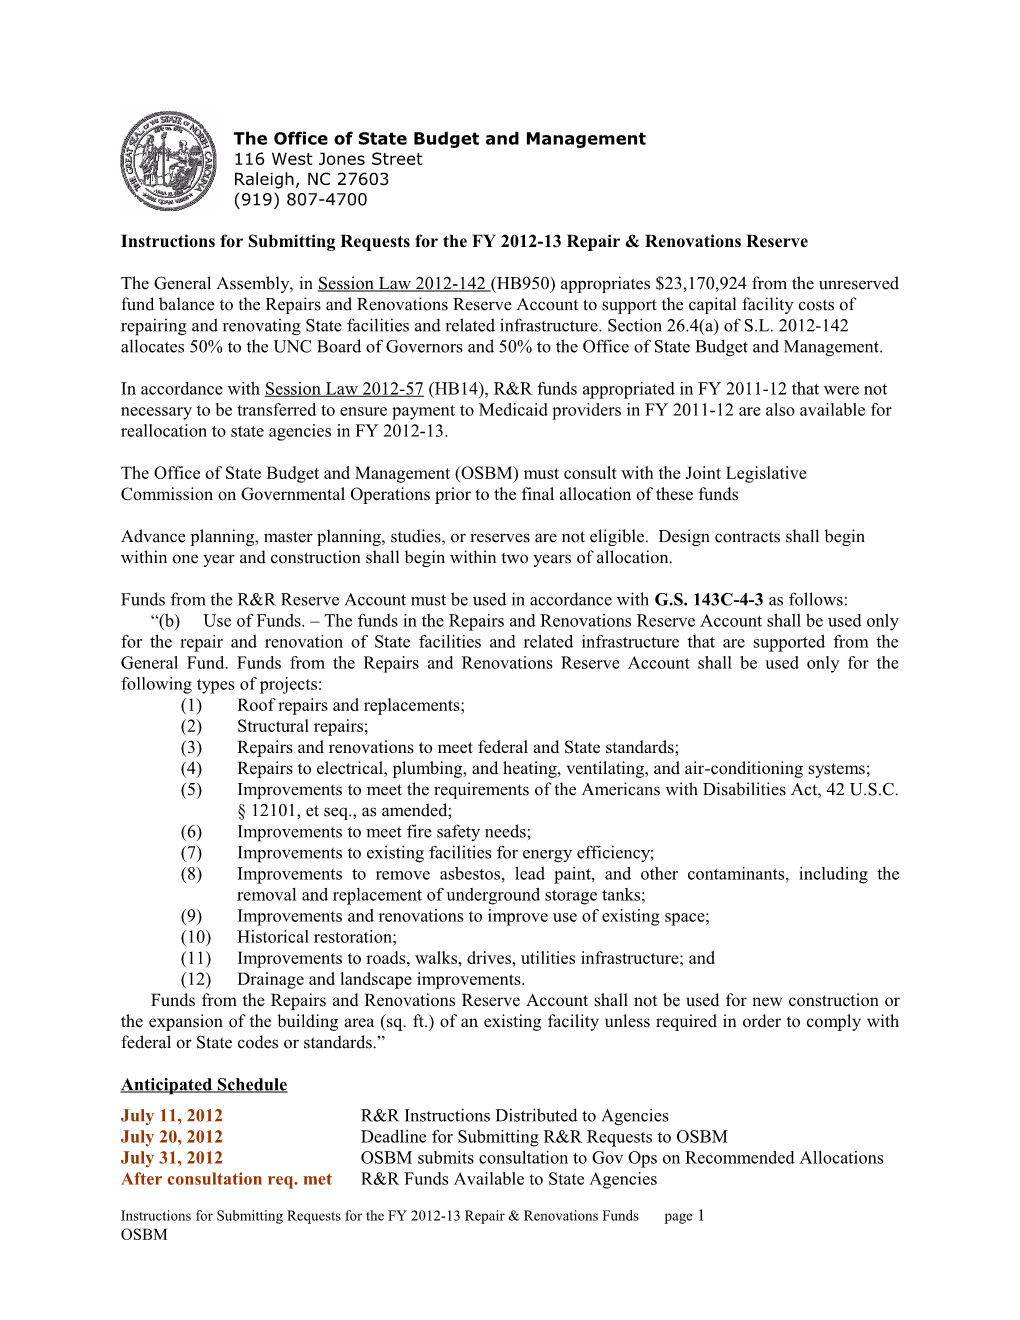 2006-07 Repair and Renovations Project Requests - General Instructions